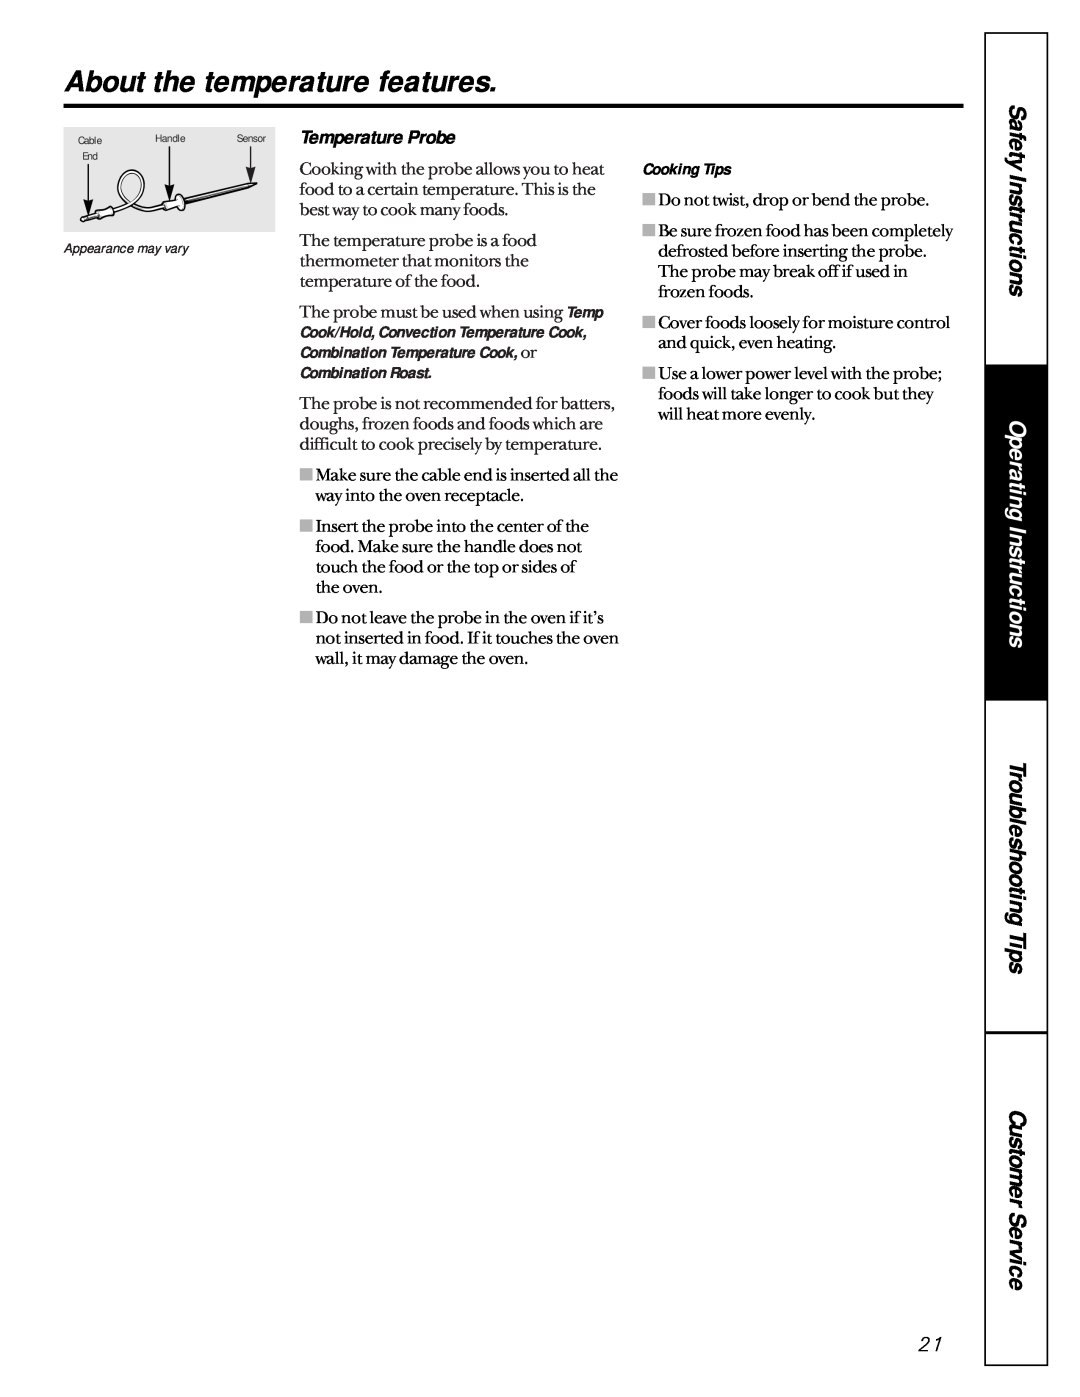 GE JE1390 owner manual About the temperature features, Safety Instructions, Operating Instructions, Temperature Probe 